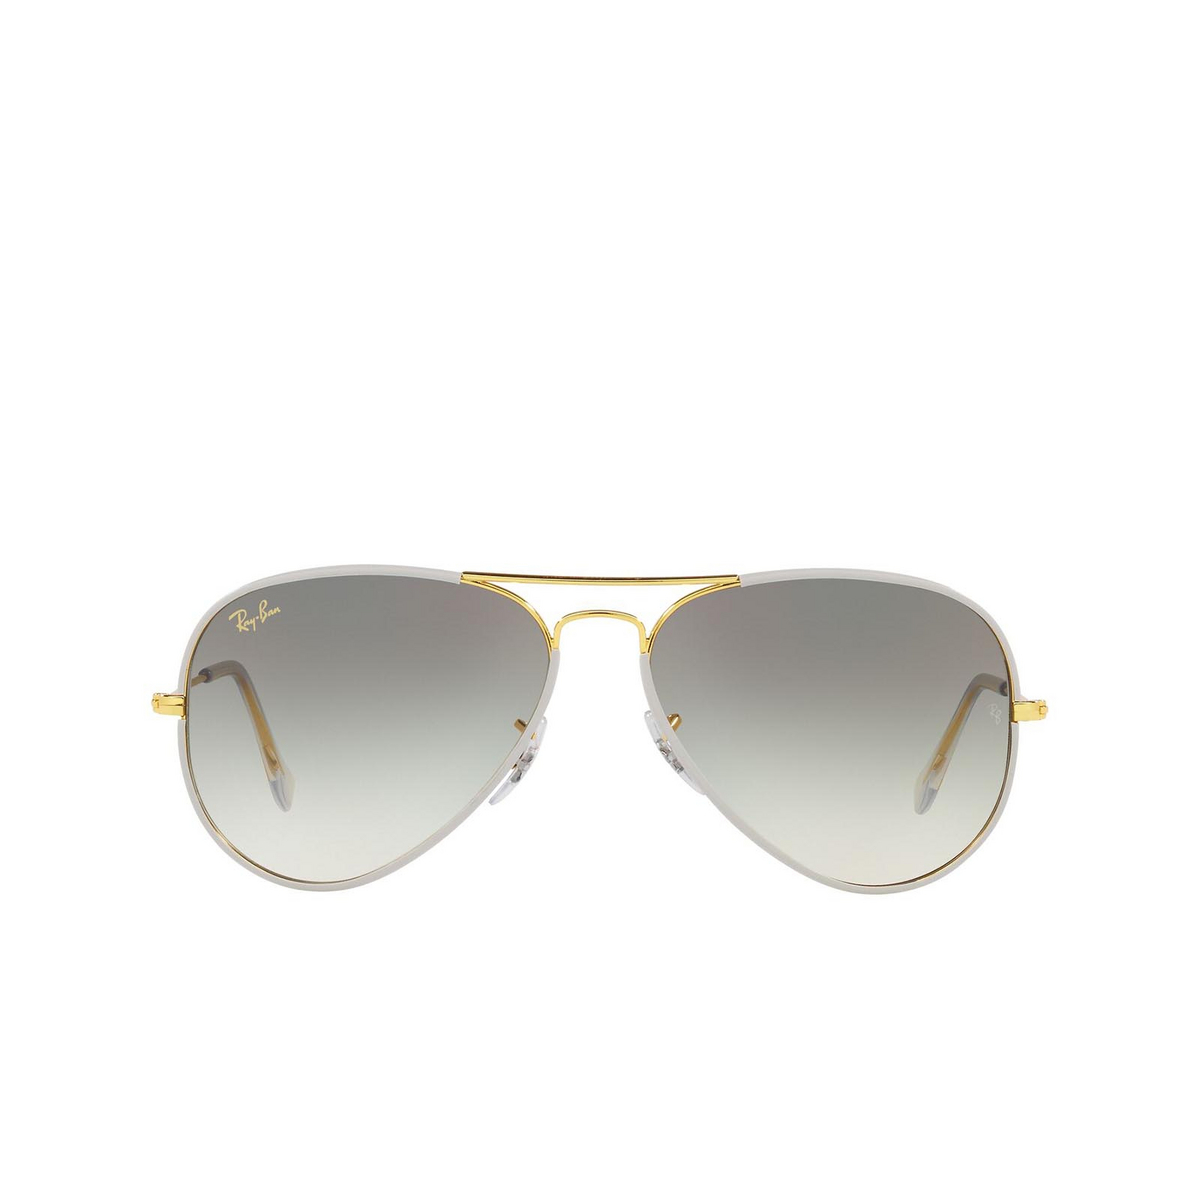 Ray-Ban AVIATOR FULL COLOR Sunglasses 919632 Grey on Legend Gold - front view